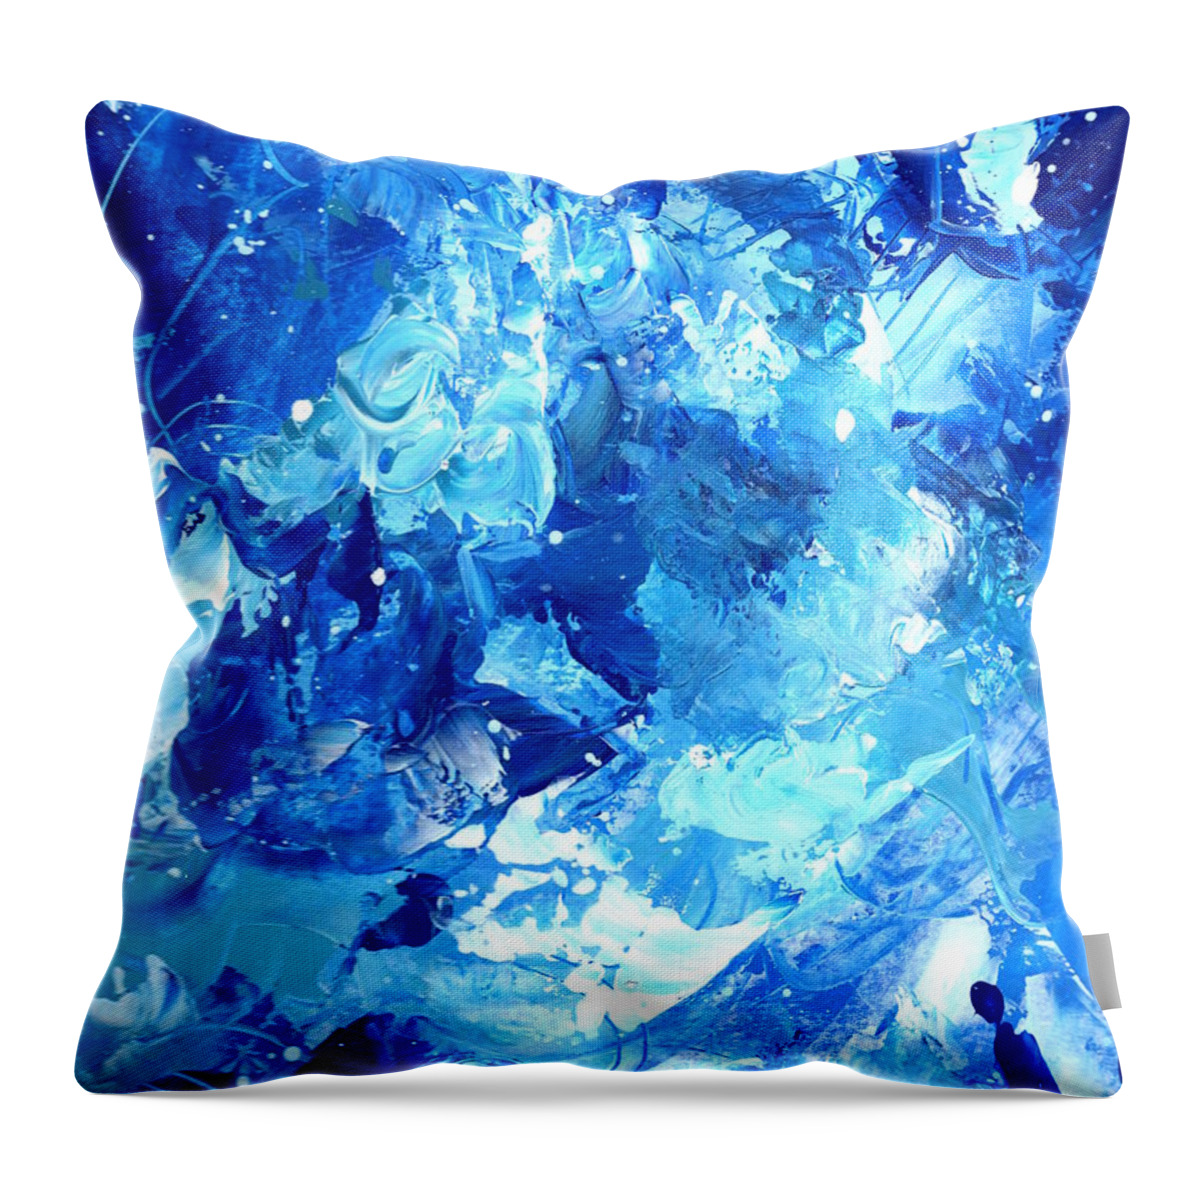 Acrylic Throw Pillow featuring the painting Ocean by Marcy Brennan